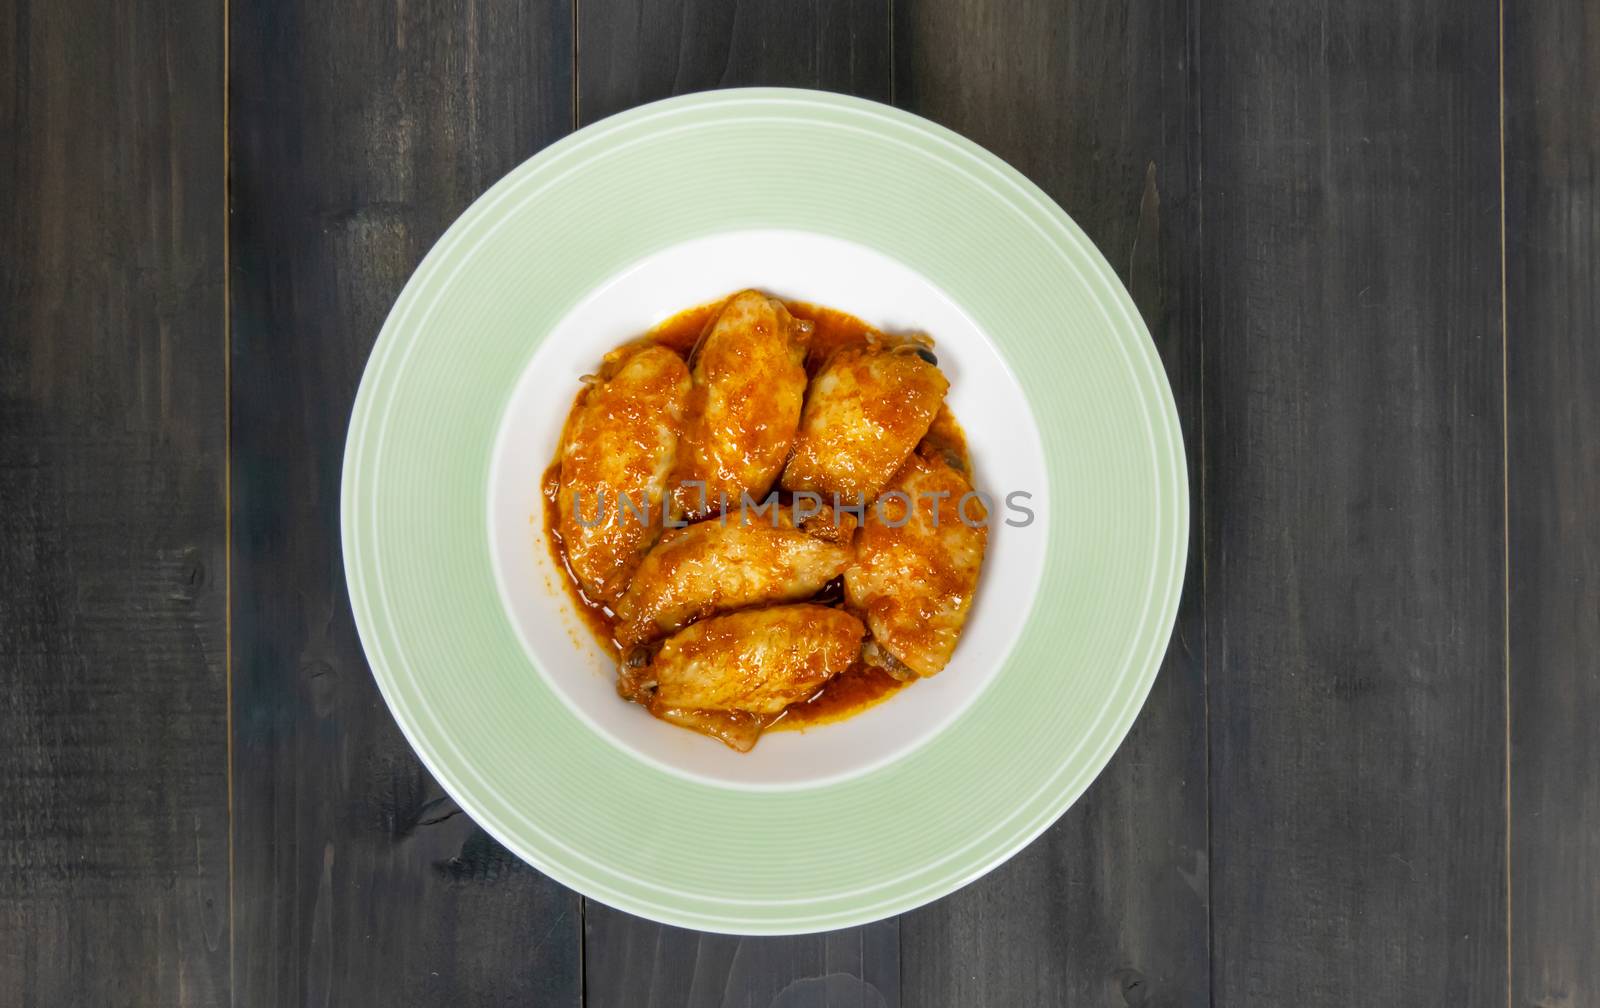 Baked chicken wings with spicy sauce. Food background with copy space. Top view